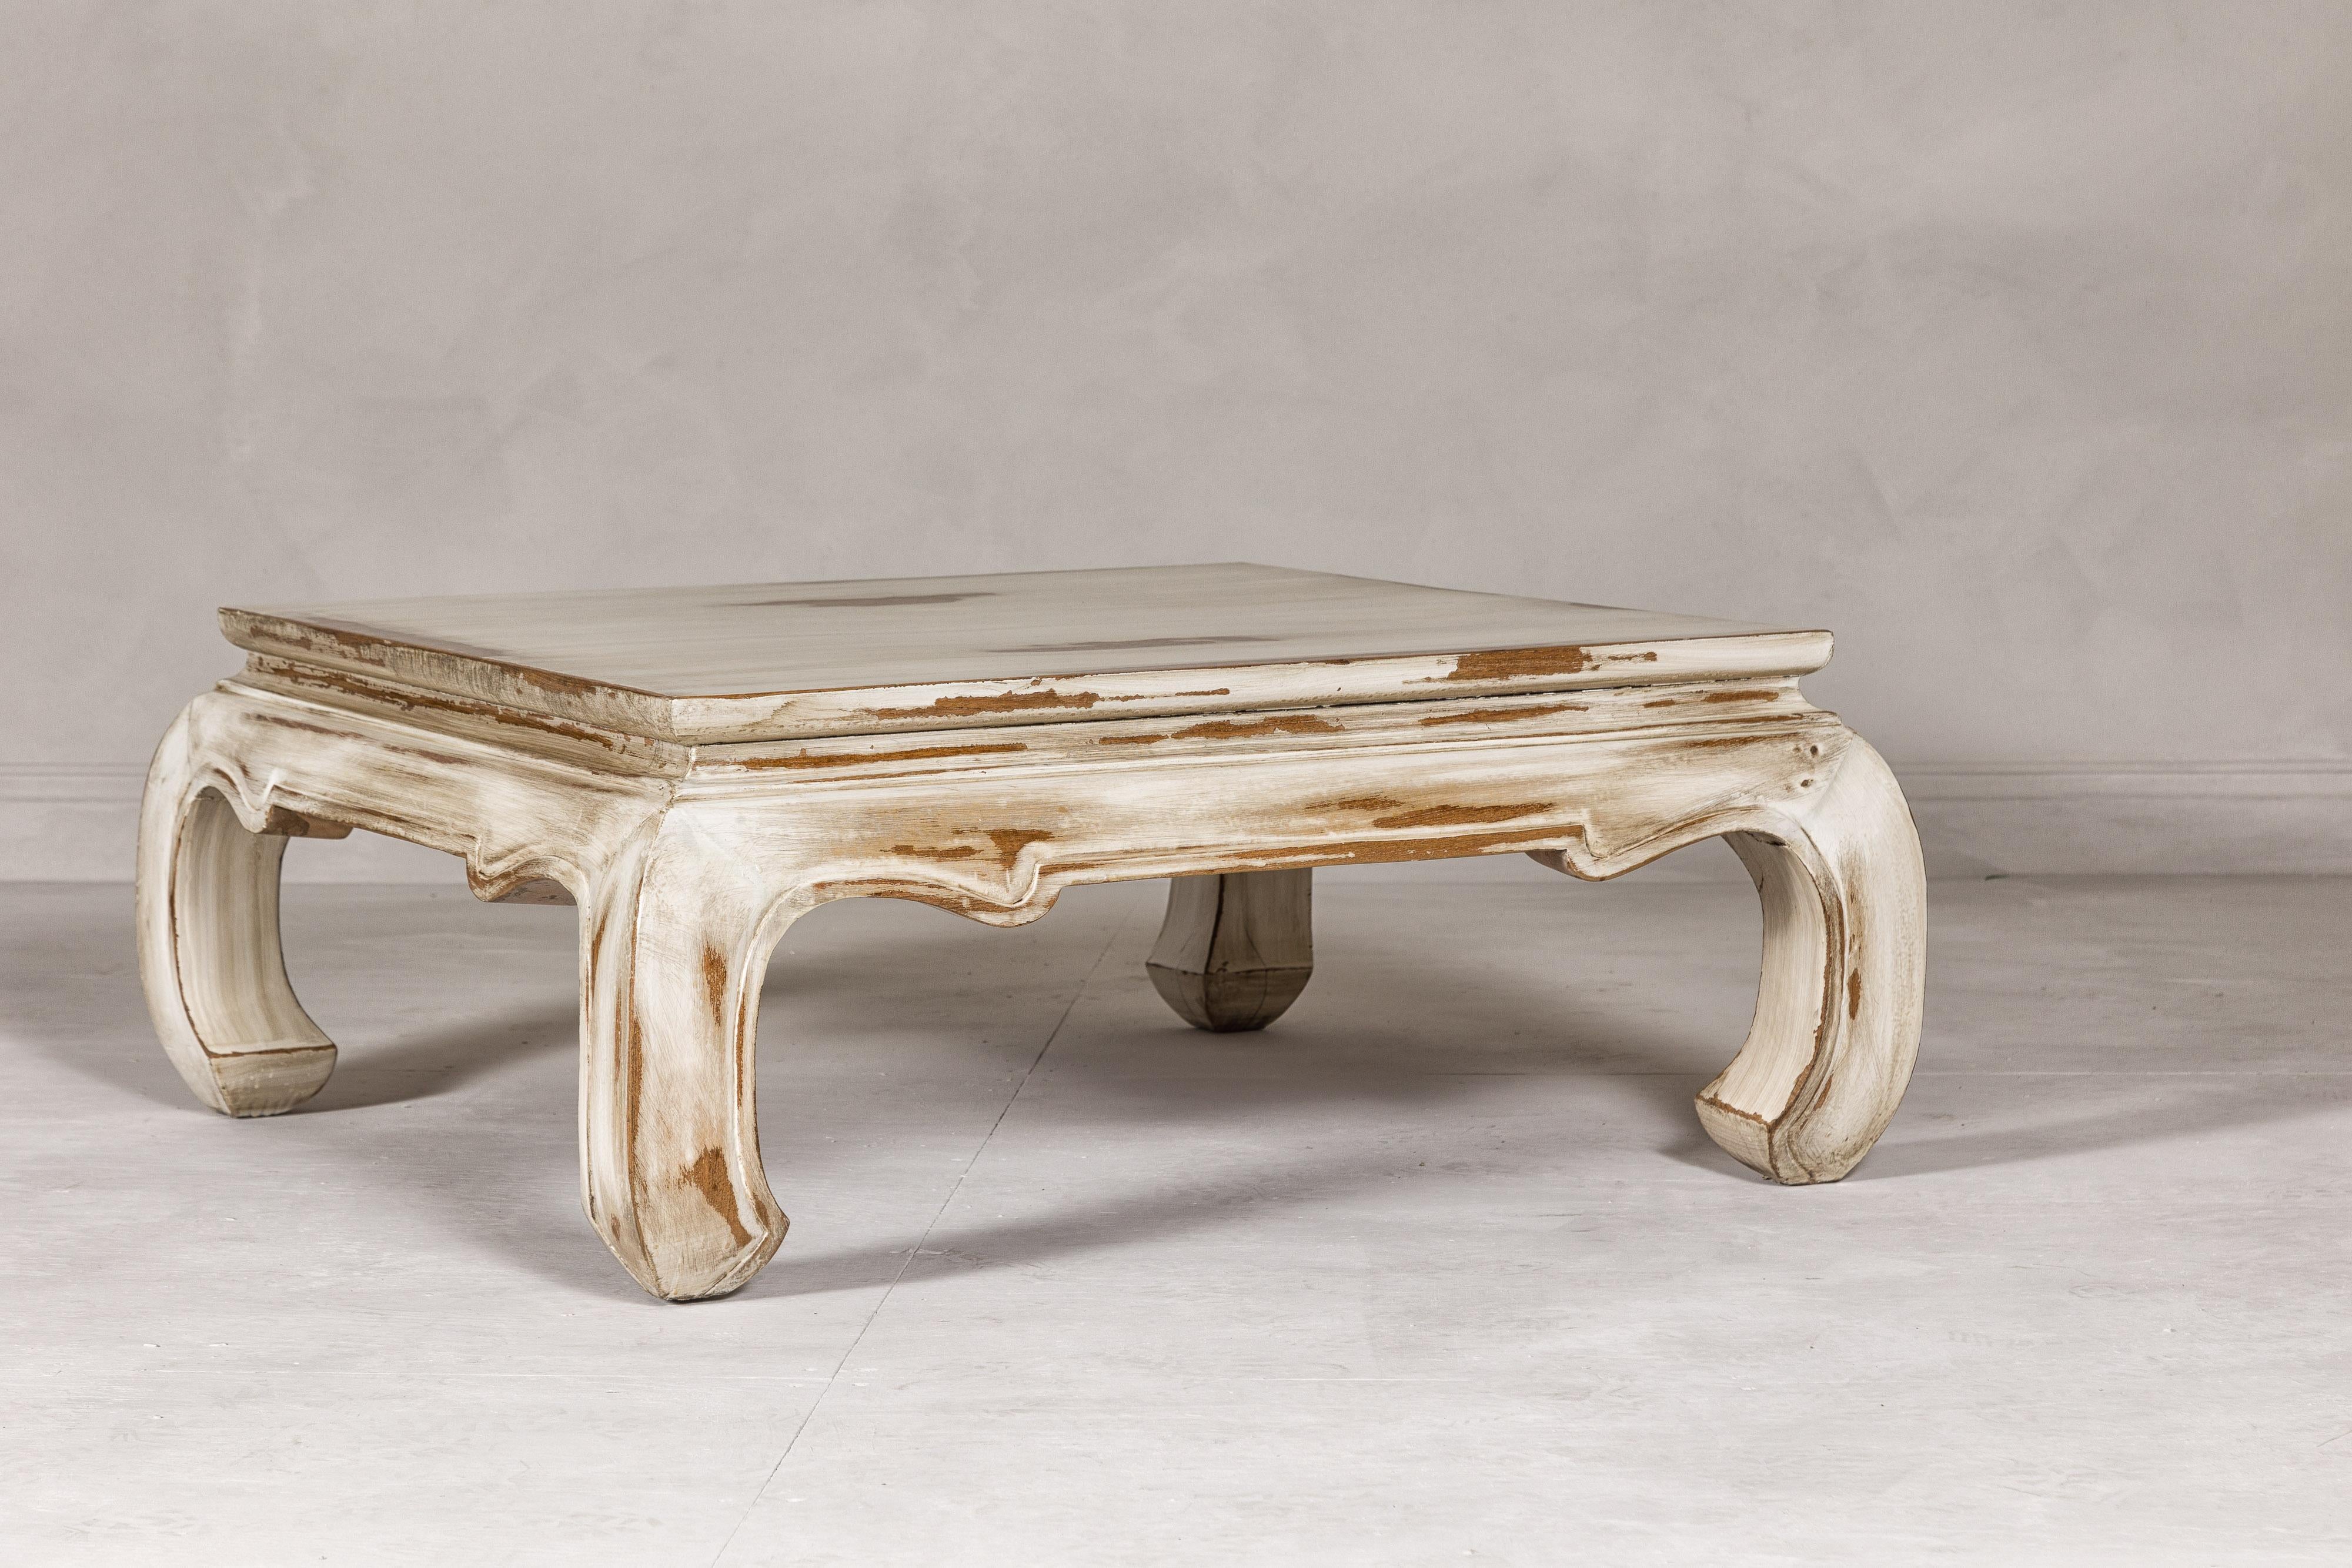 Carved Distressed White Coffee Table with Chow Legs and Square Top, Vintage